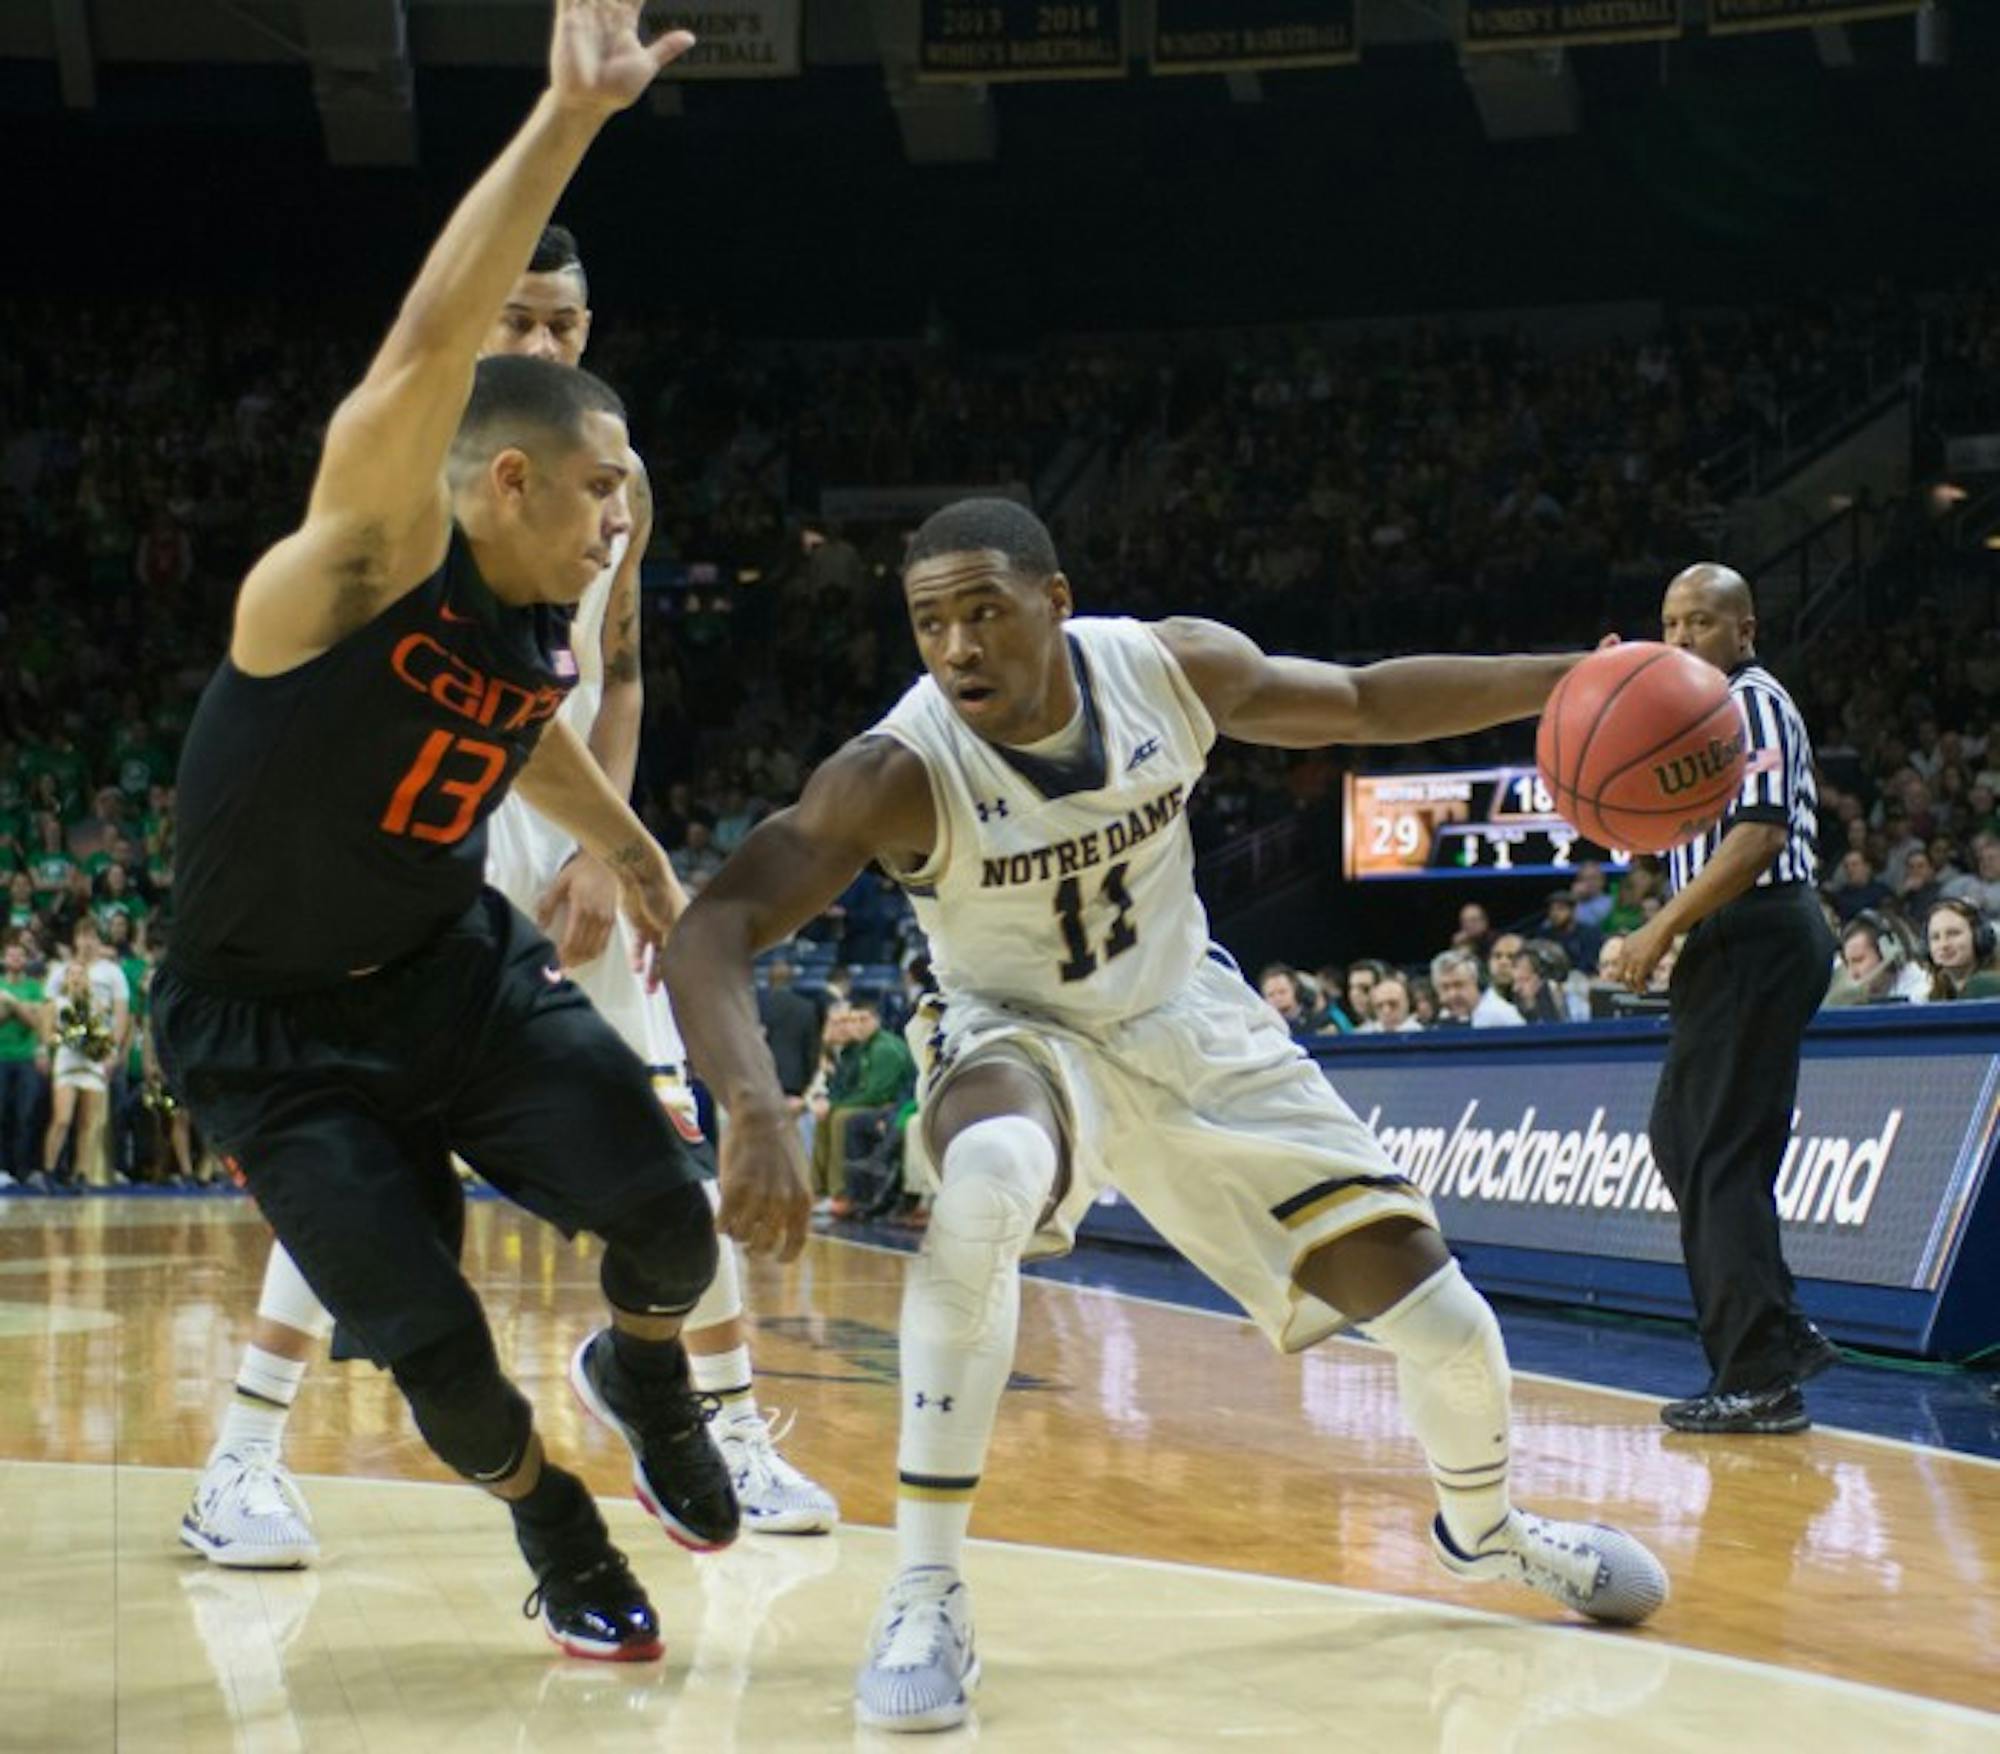 Irish sophomore Demetrius Jackson maneuvers around a defender during Notre Dame’s 75-70 win over Miami on Jan. 17 at Purcell Pavilion. Jackson has turned the ball over just 25 times in 19 games this season.